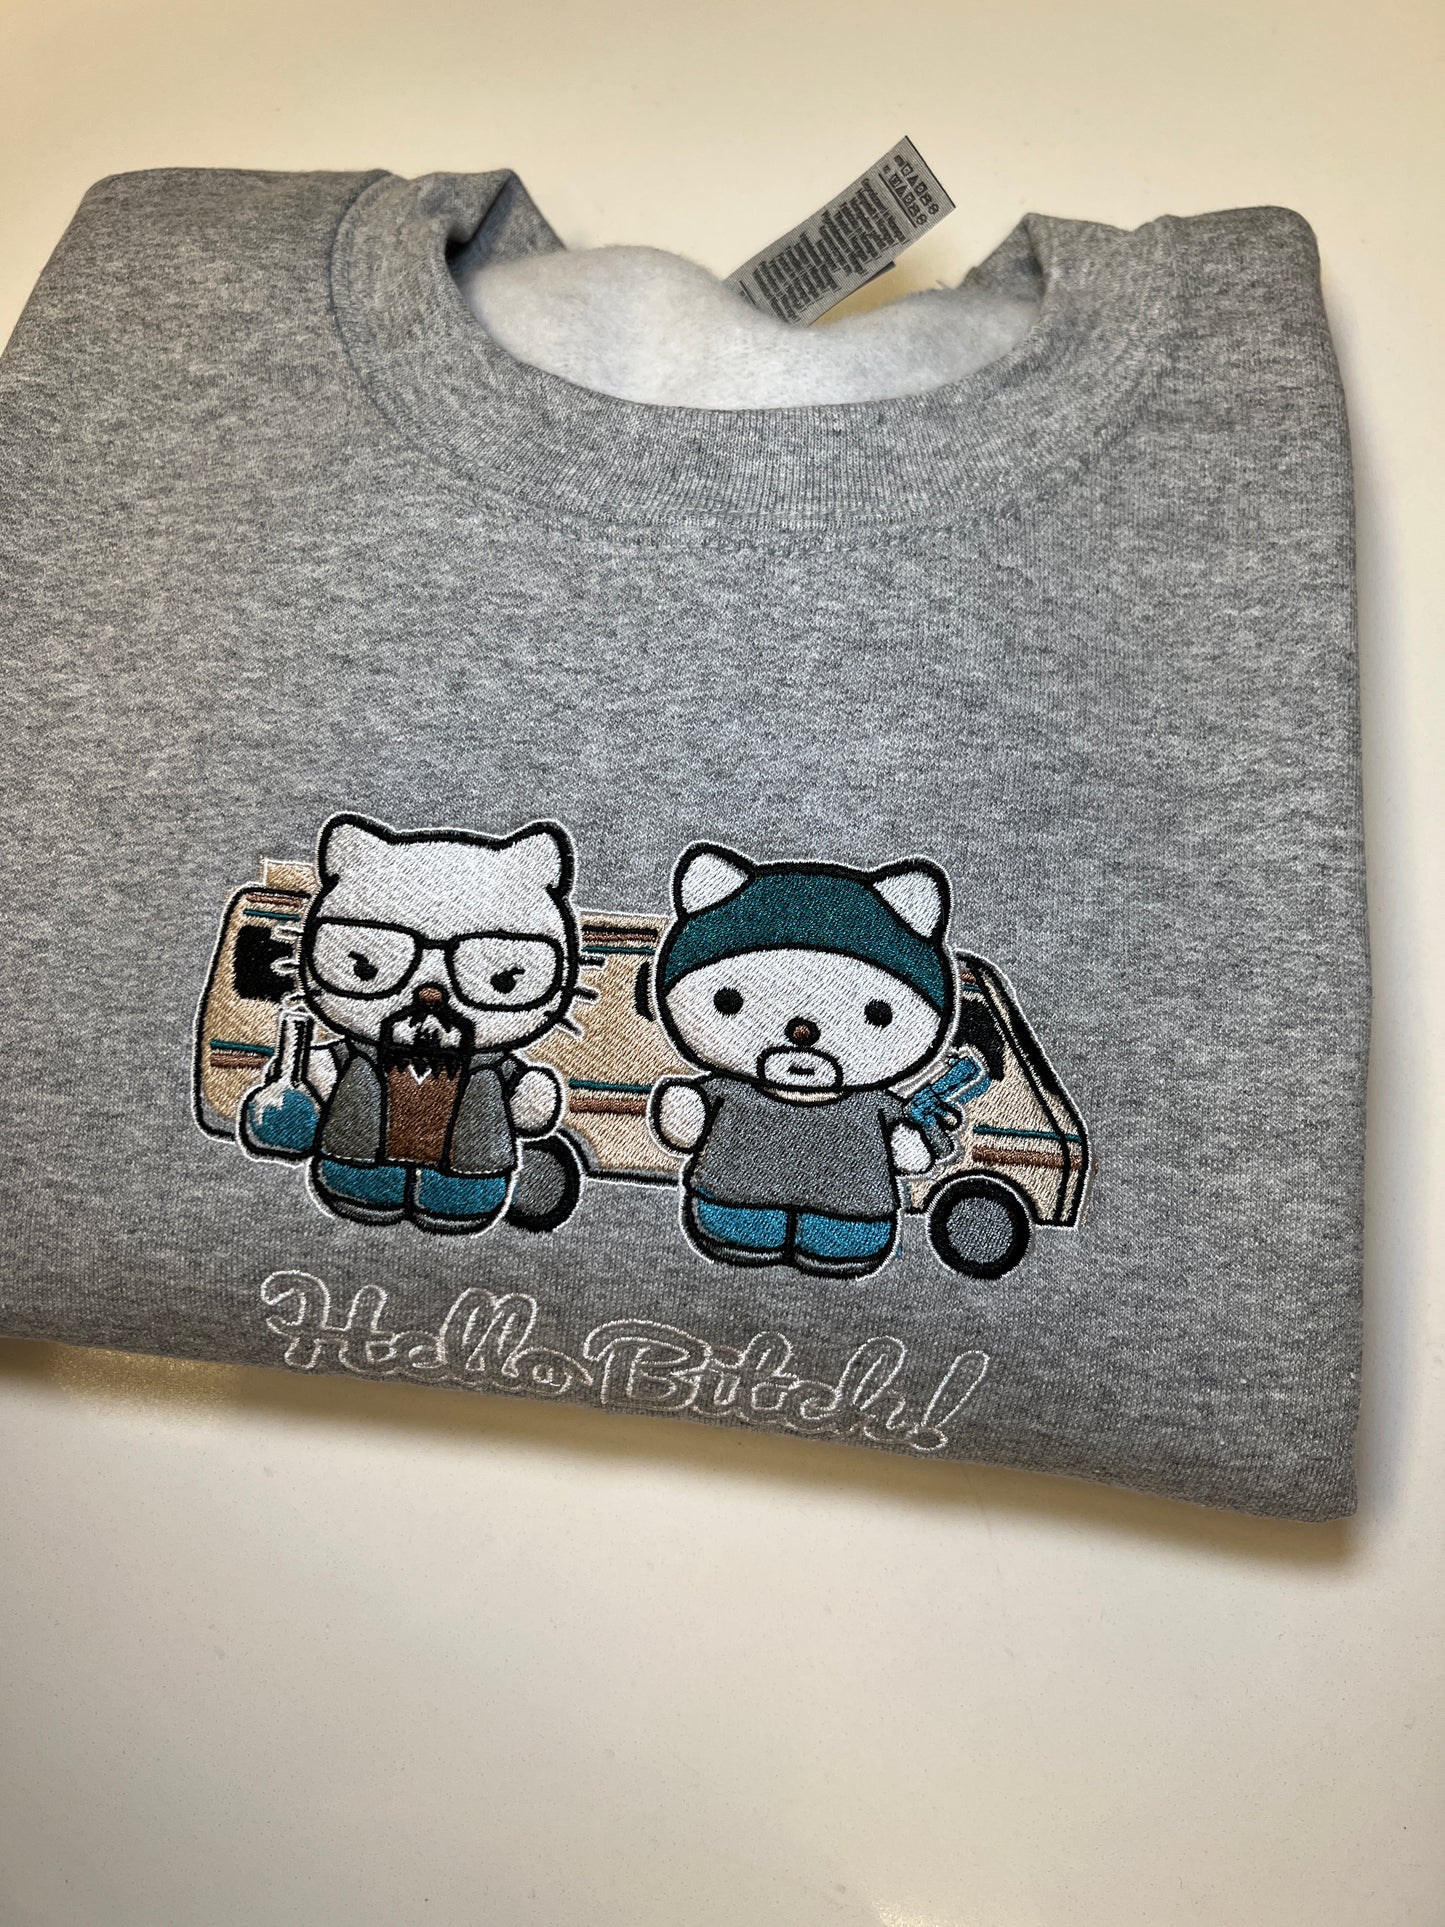 Breaking Bad x Hello Kitty (with words)